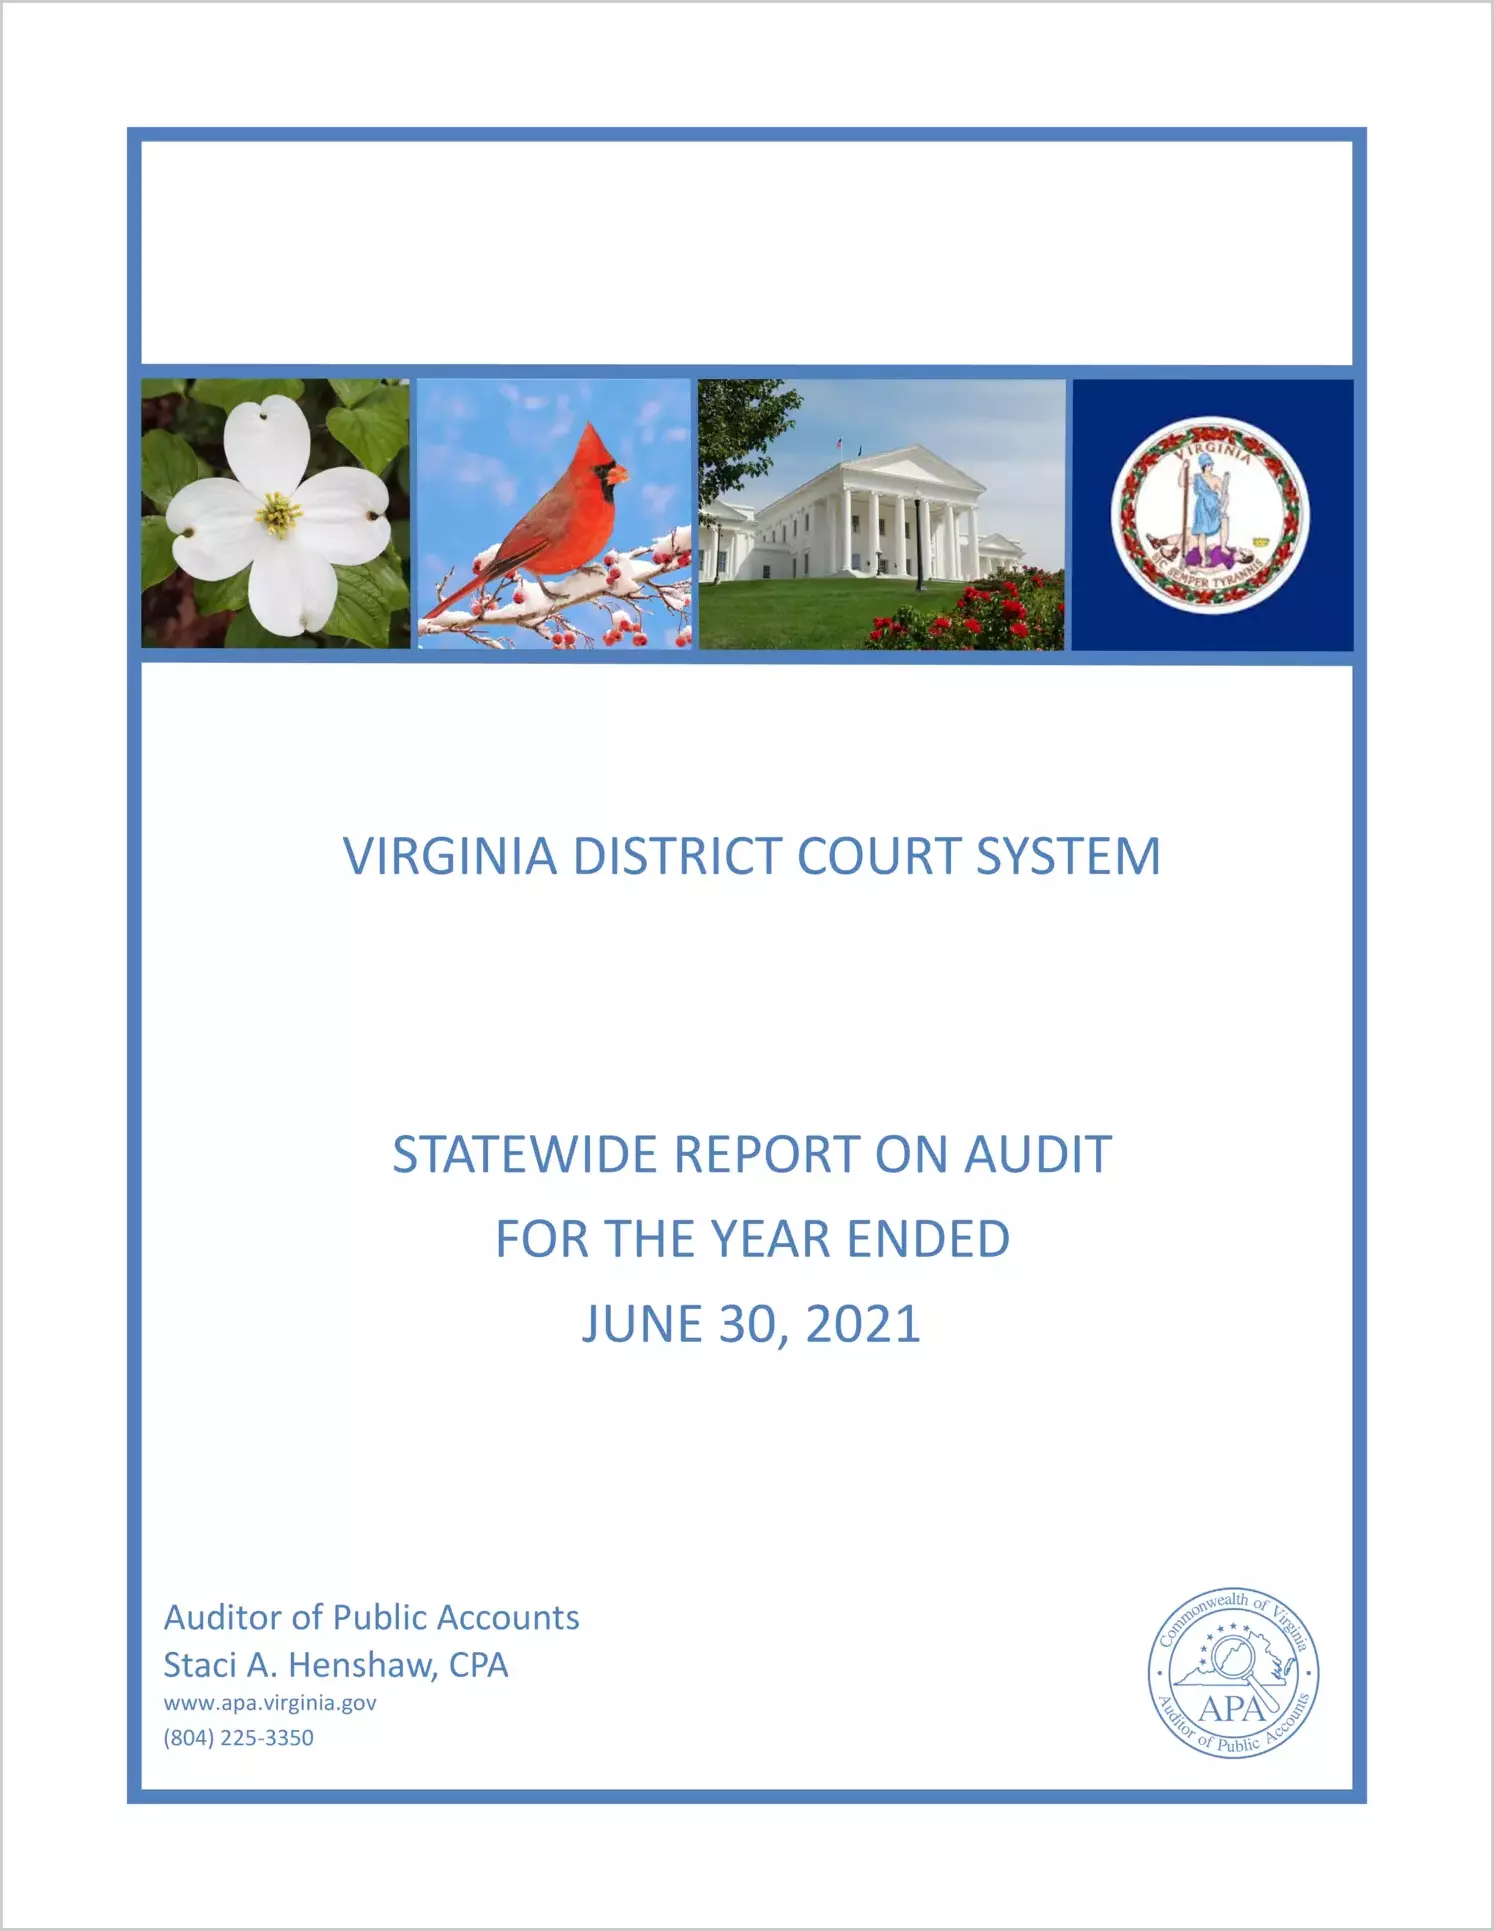 Virginia District Court System Statewide Report on Audit for the year ended June 30, 2021